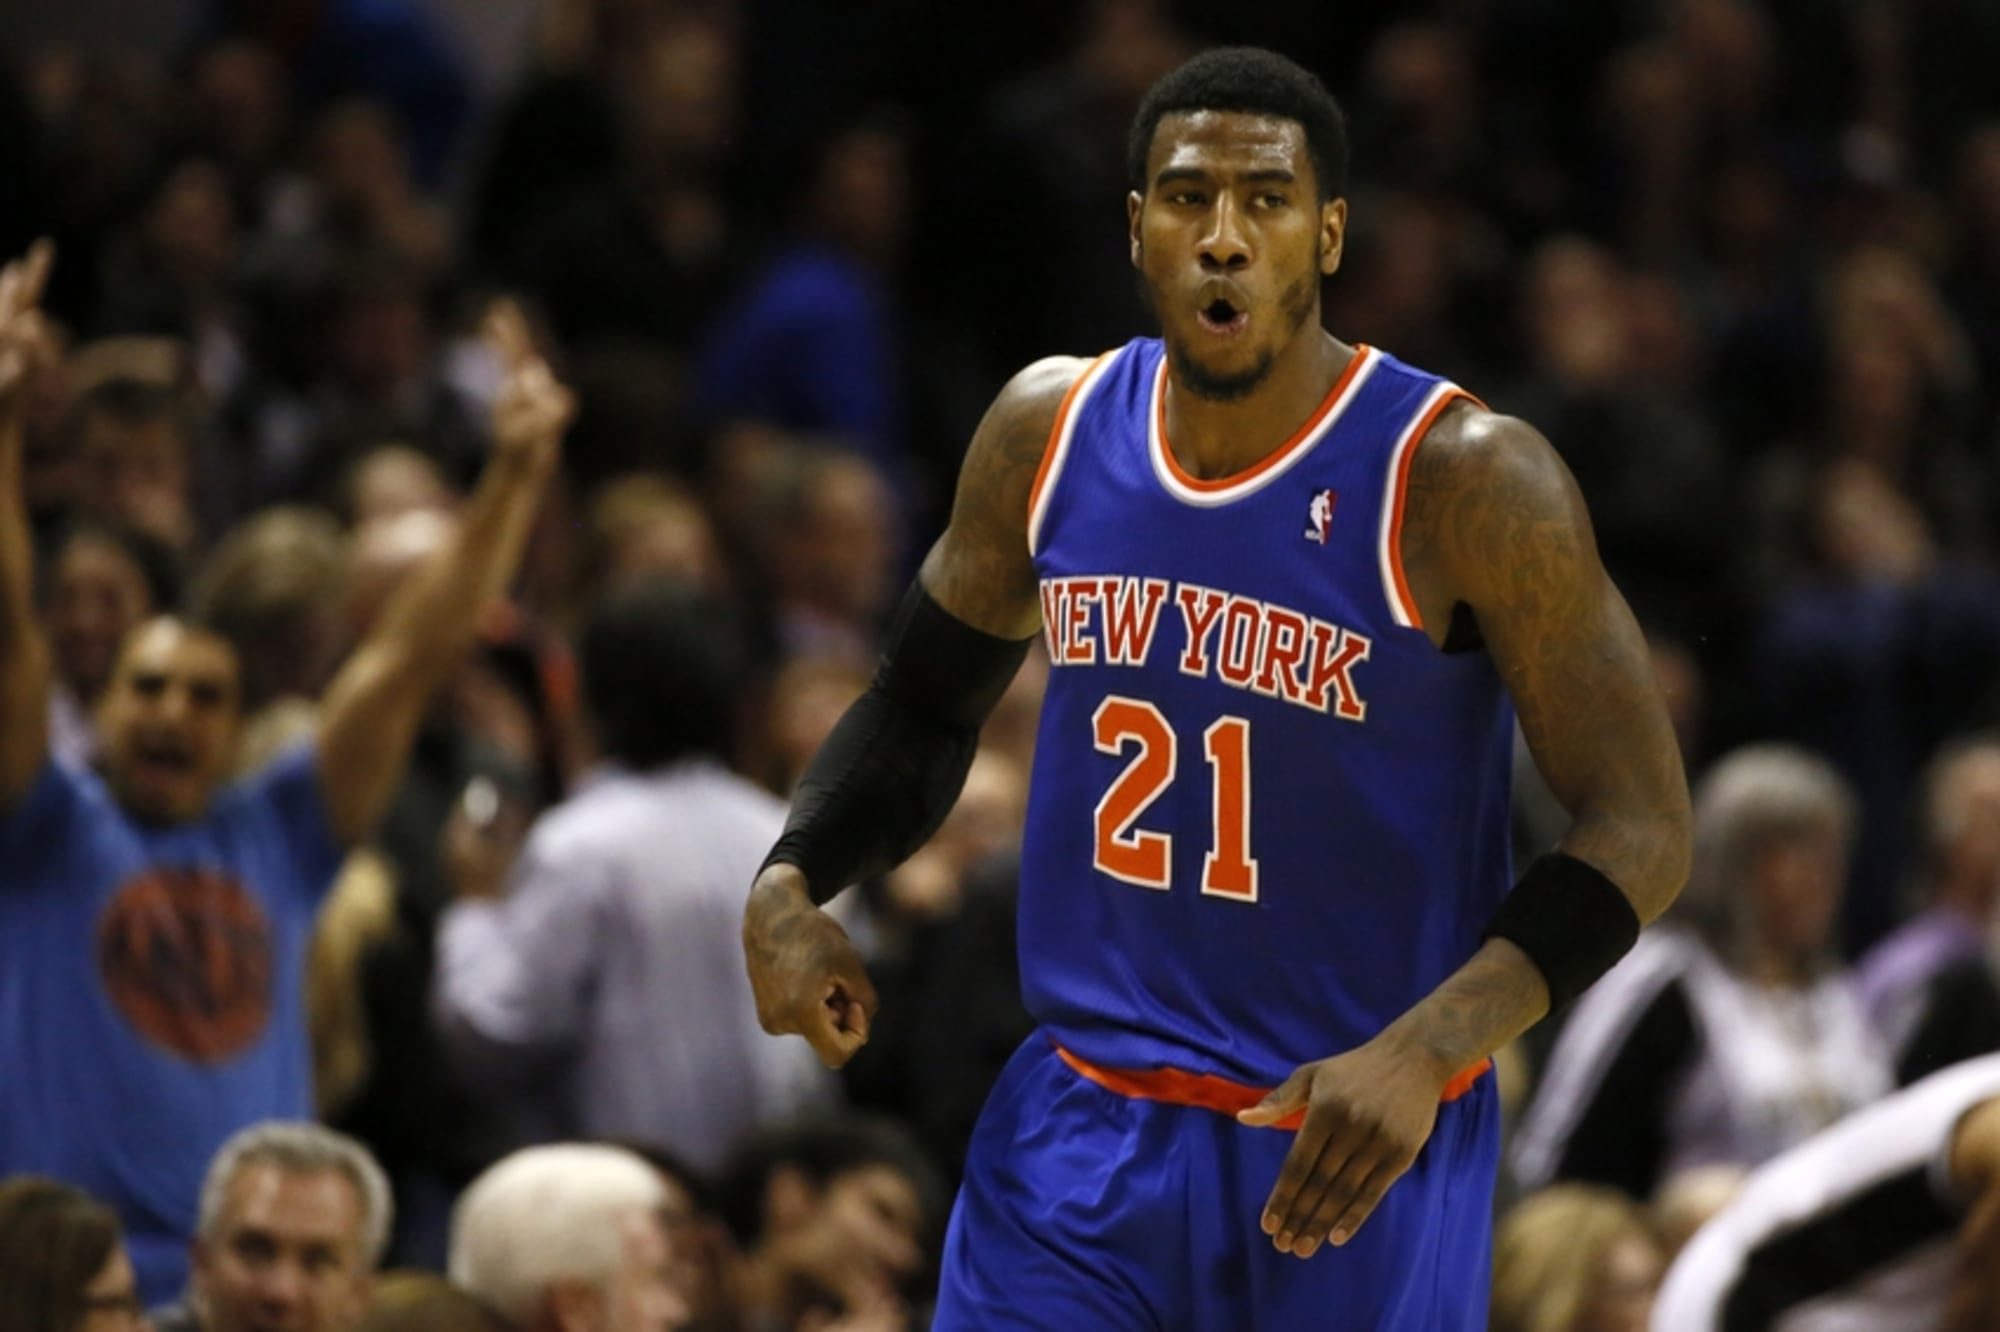 Iman Shumpert reacts to being traded to the Houston Rockets